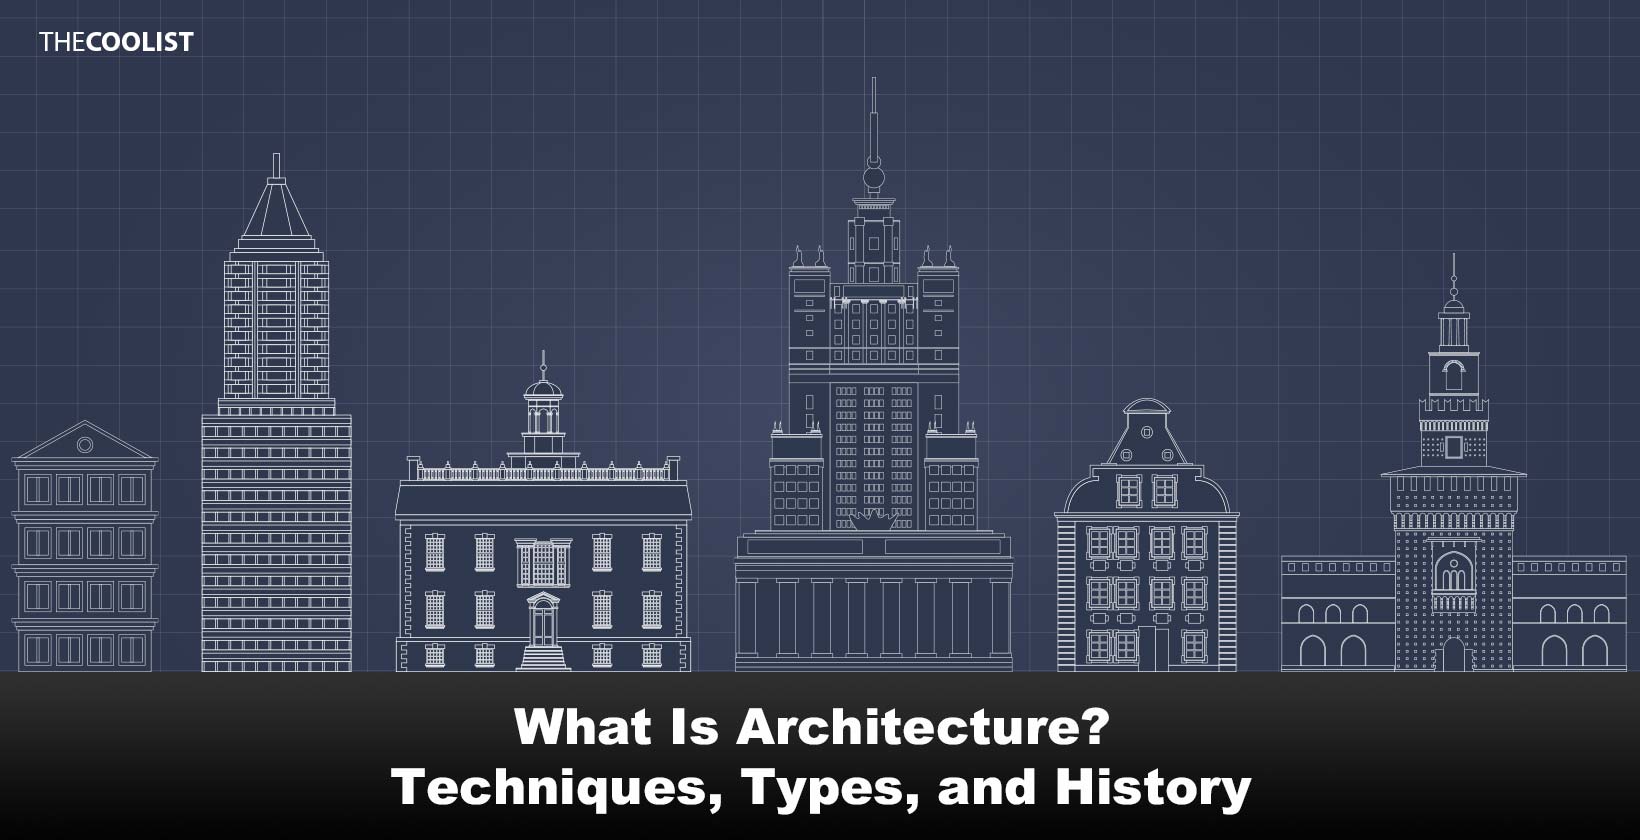 What Is Architecture? (Techniques, Types, and History)